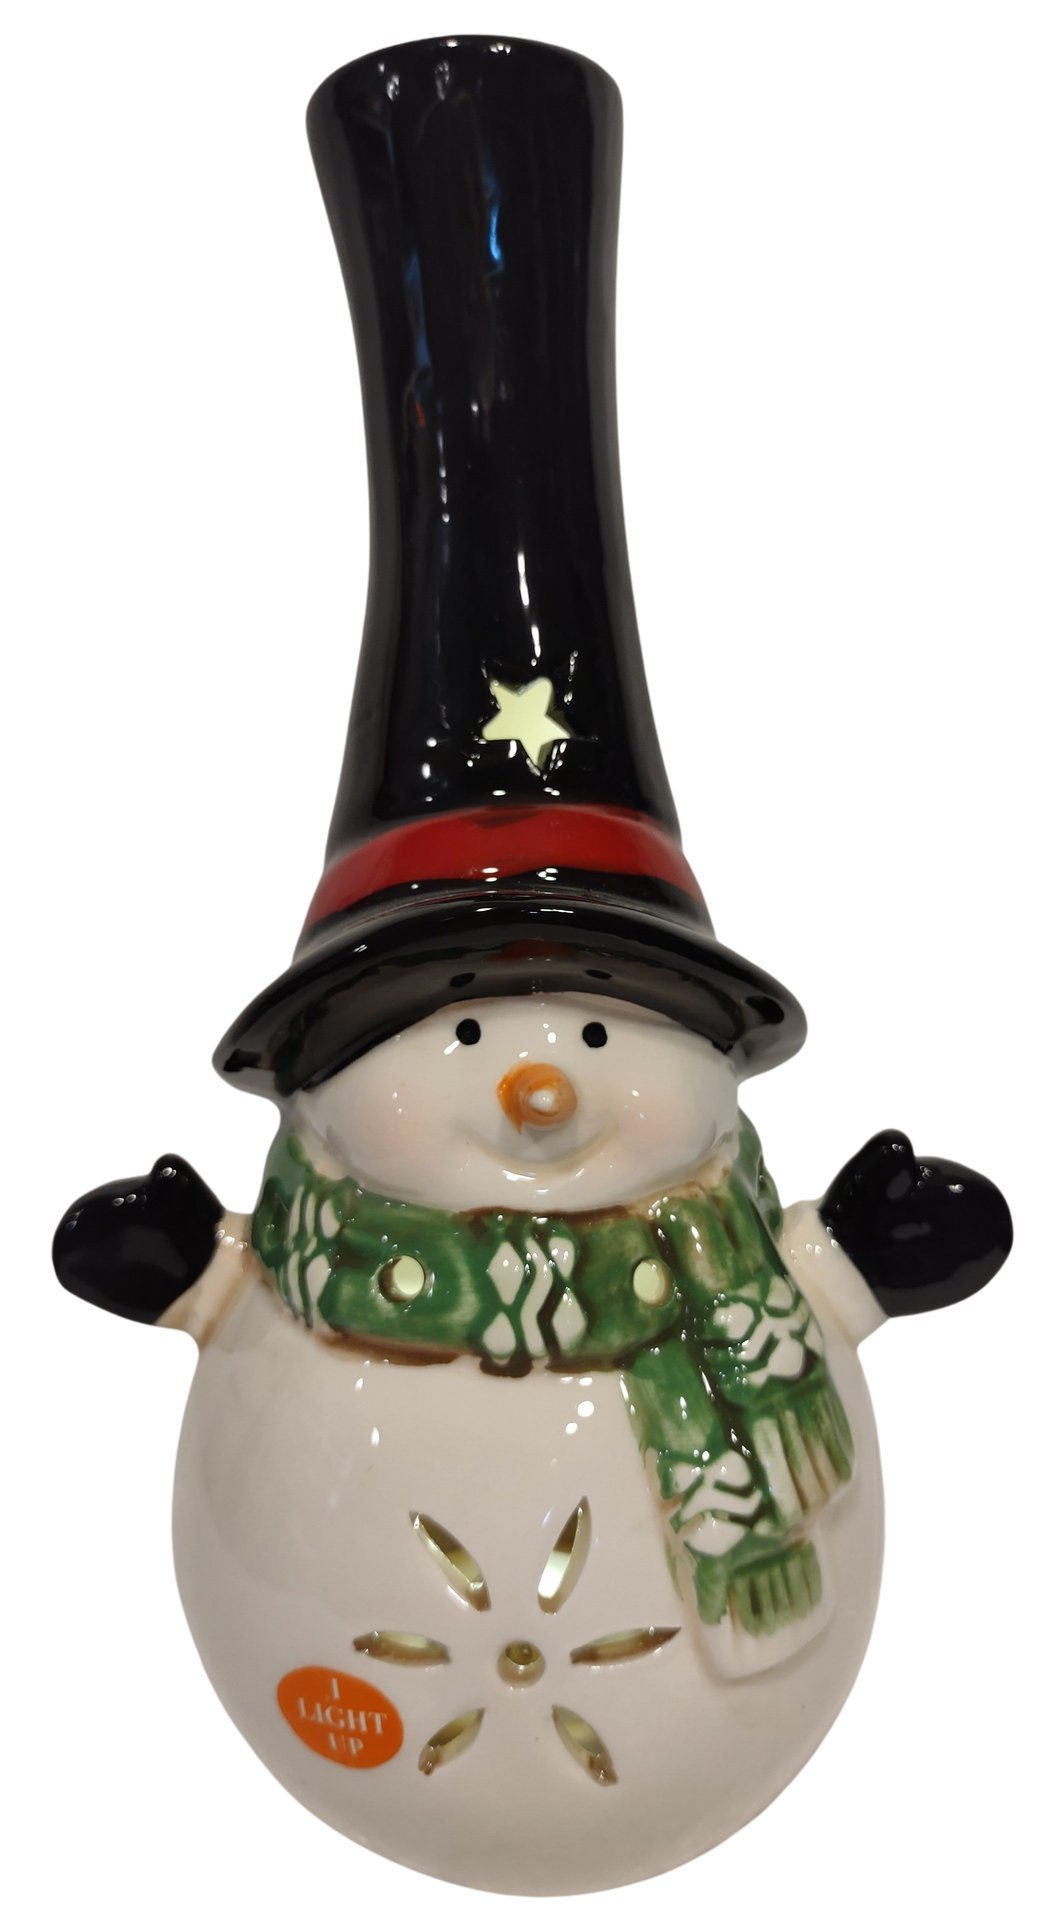 Ceramic Snowman Figurine with Tall Black Hat & Green Scarf Lights UP 9